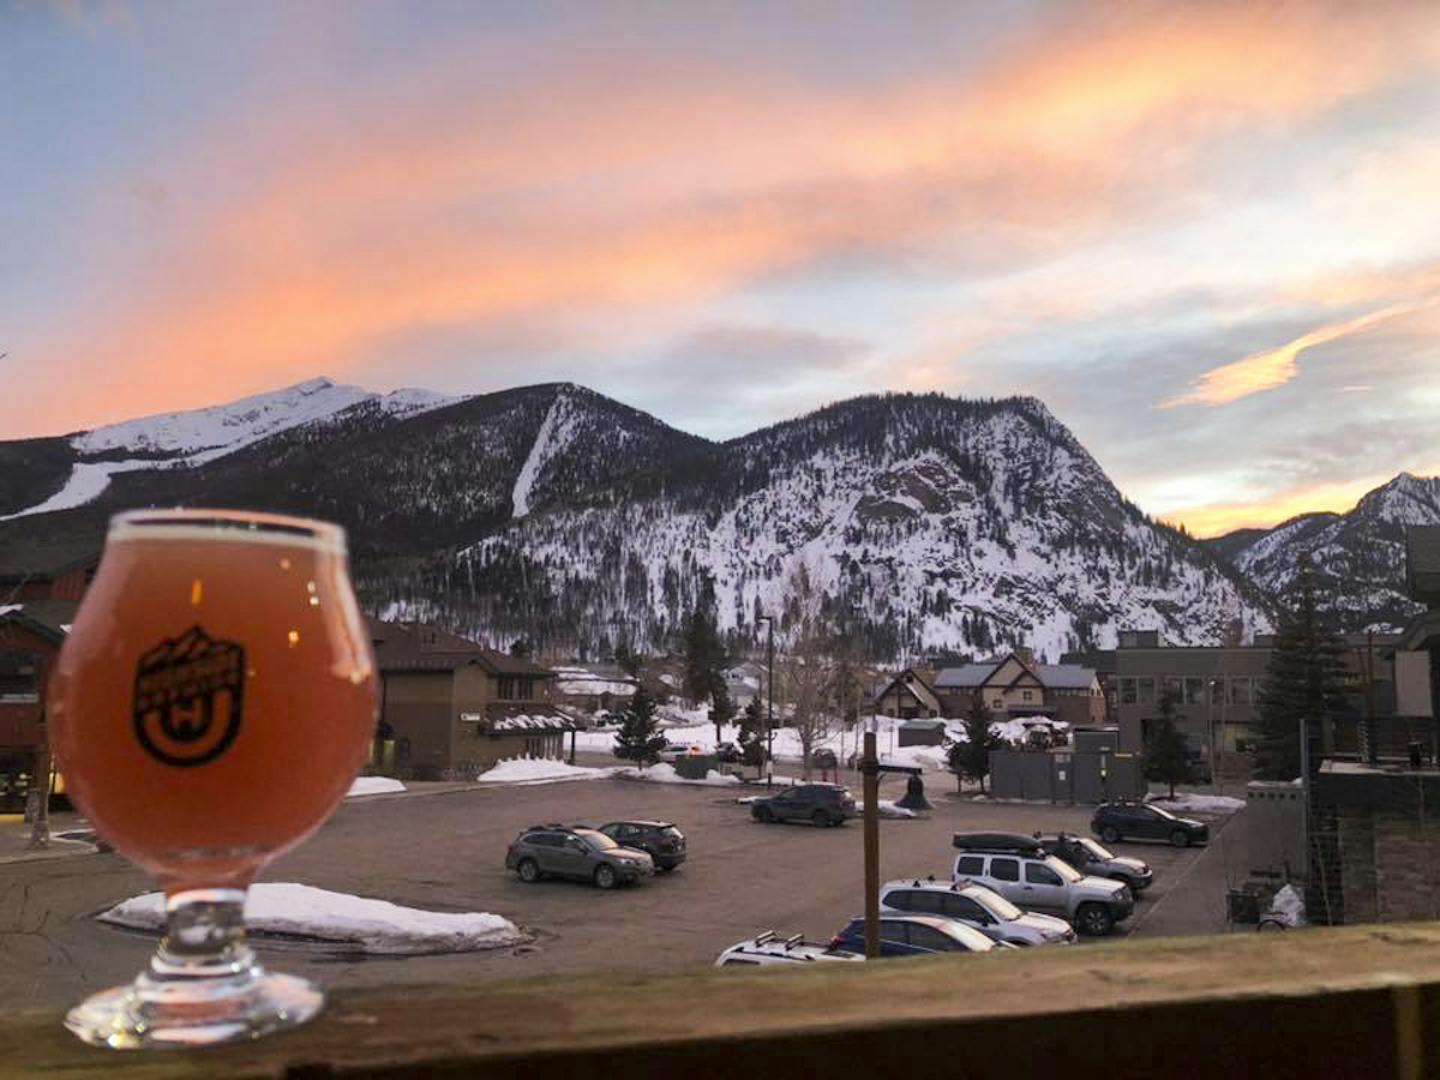 Beer with a view of the upstairs balcony